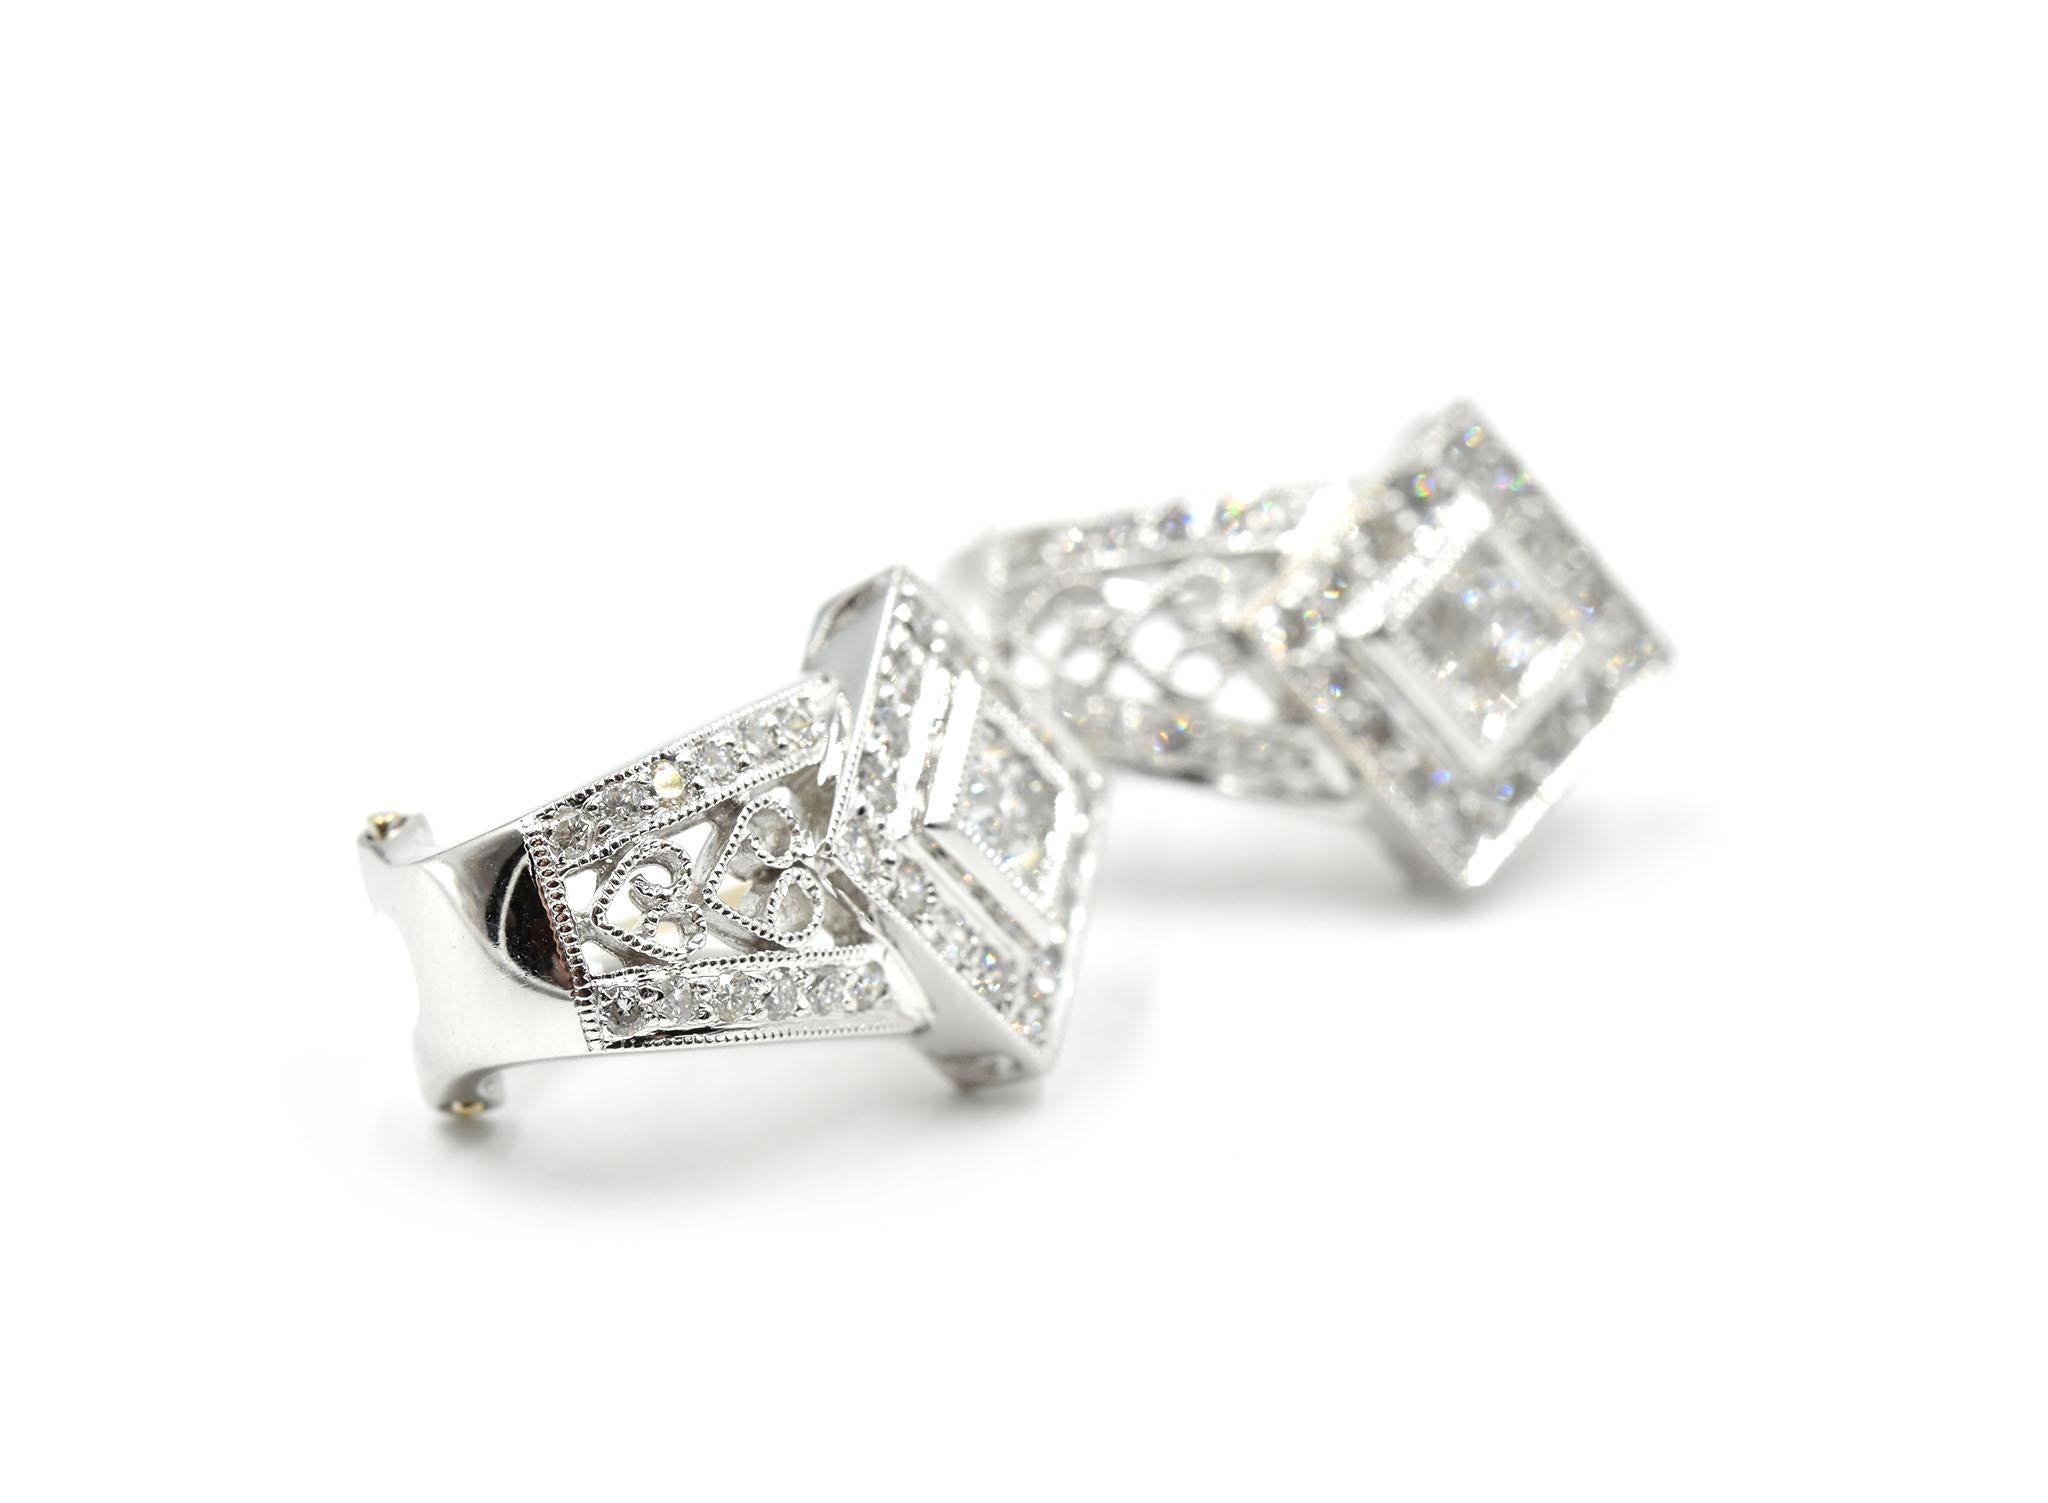 This pair of earrings are so dazzling it is unbelievable when seen in person! Each vintage designed earring is made in 18k white gold and set with quad princess cut diamonds in each center stone position. The princess cut diamonds weigh 0.48 carats.